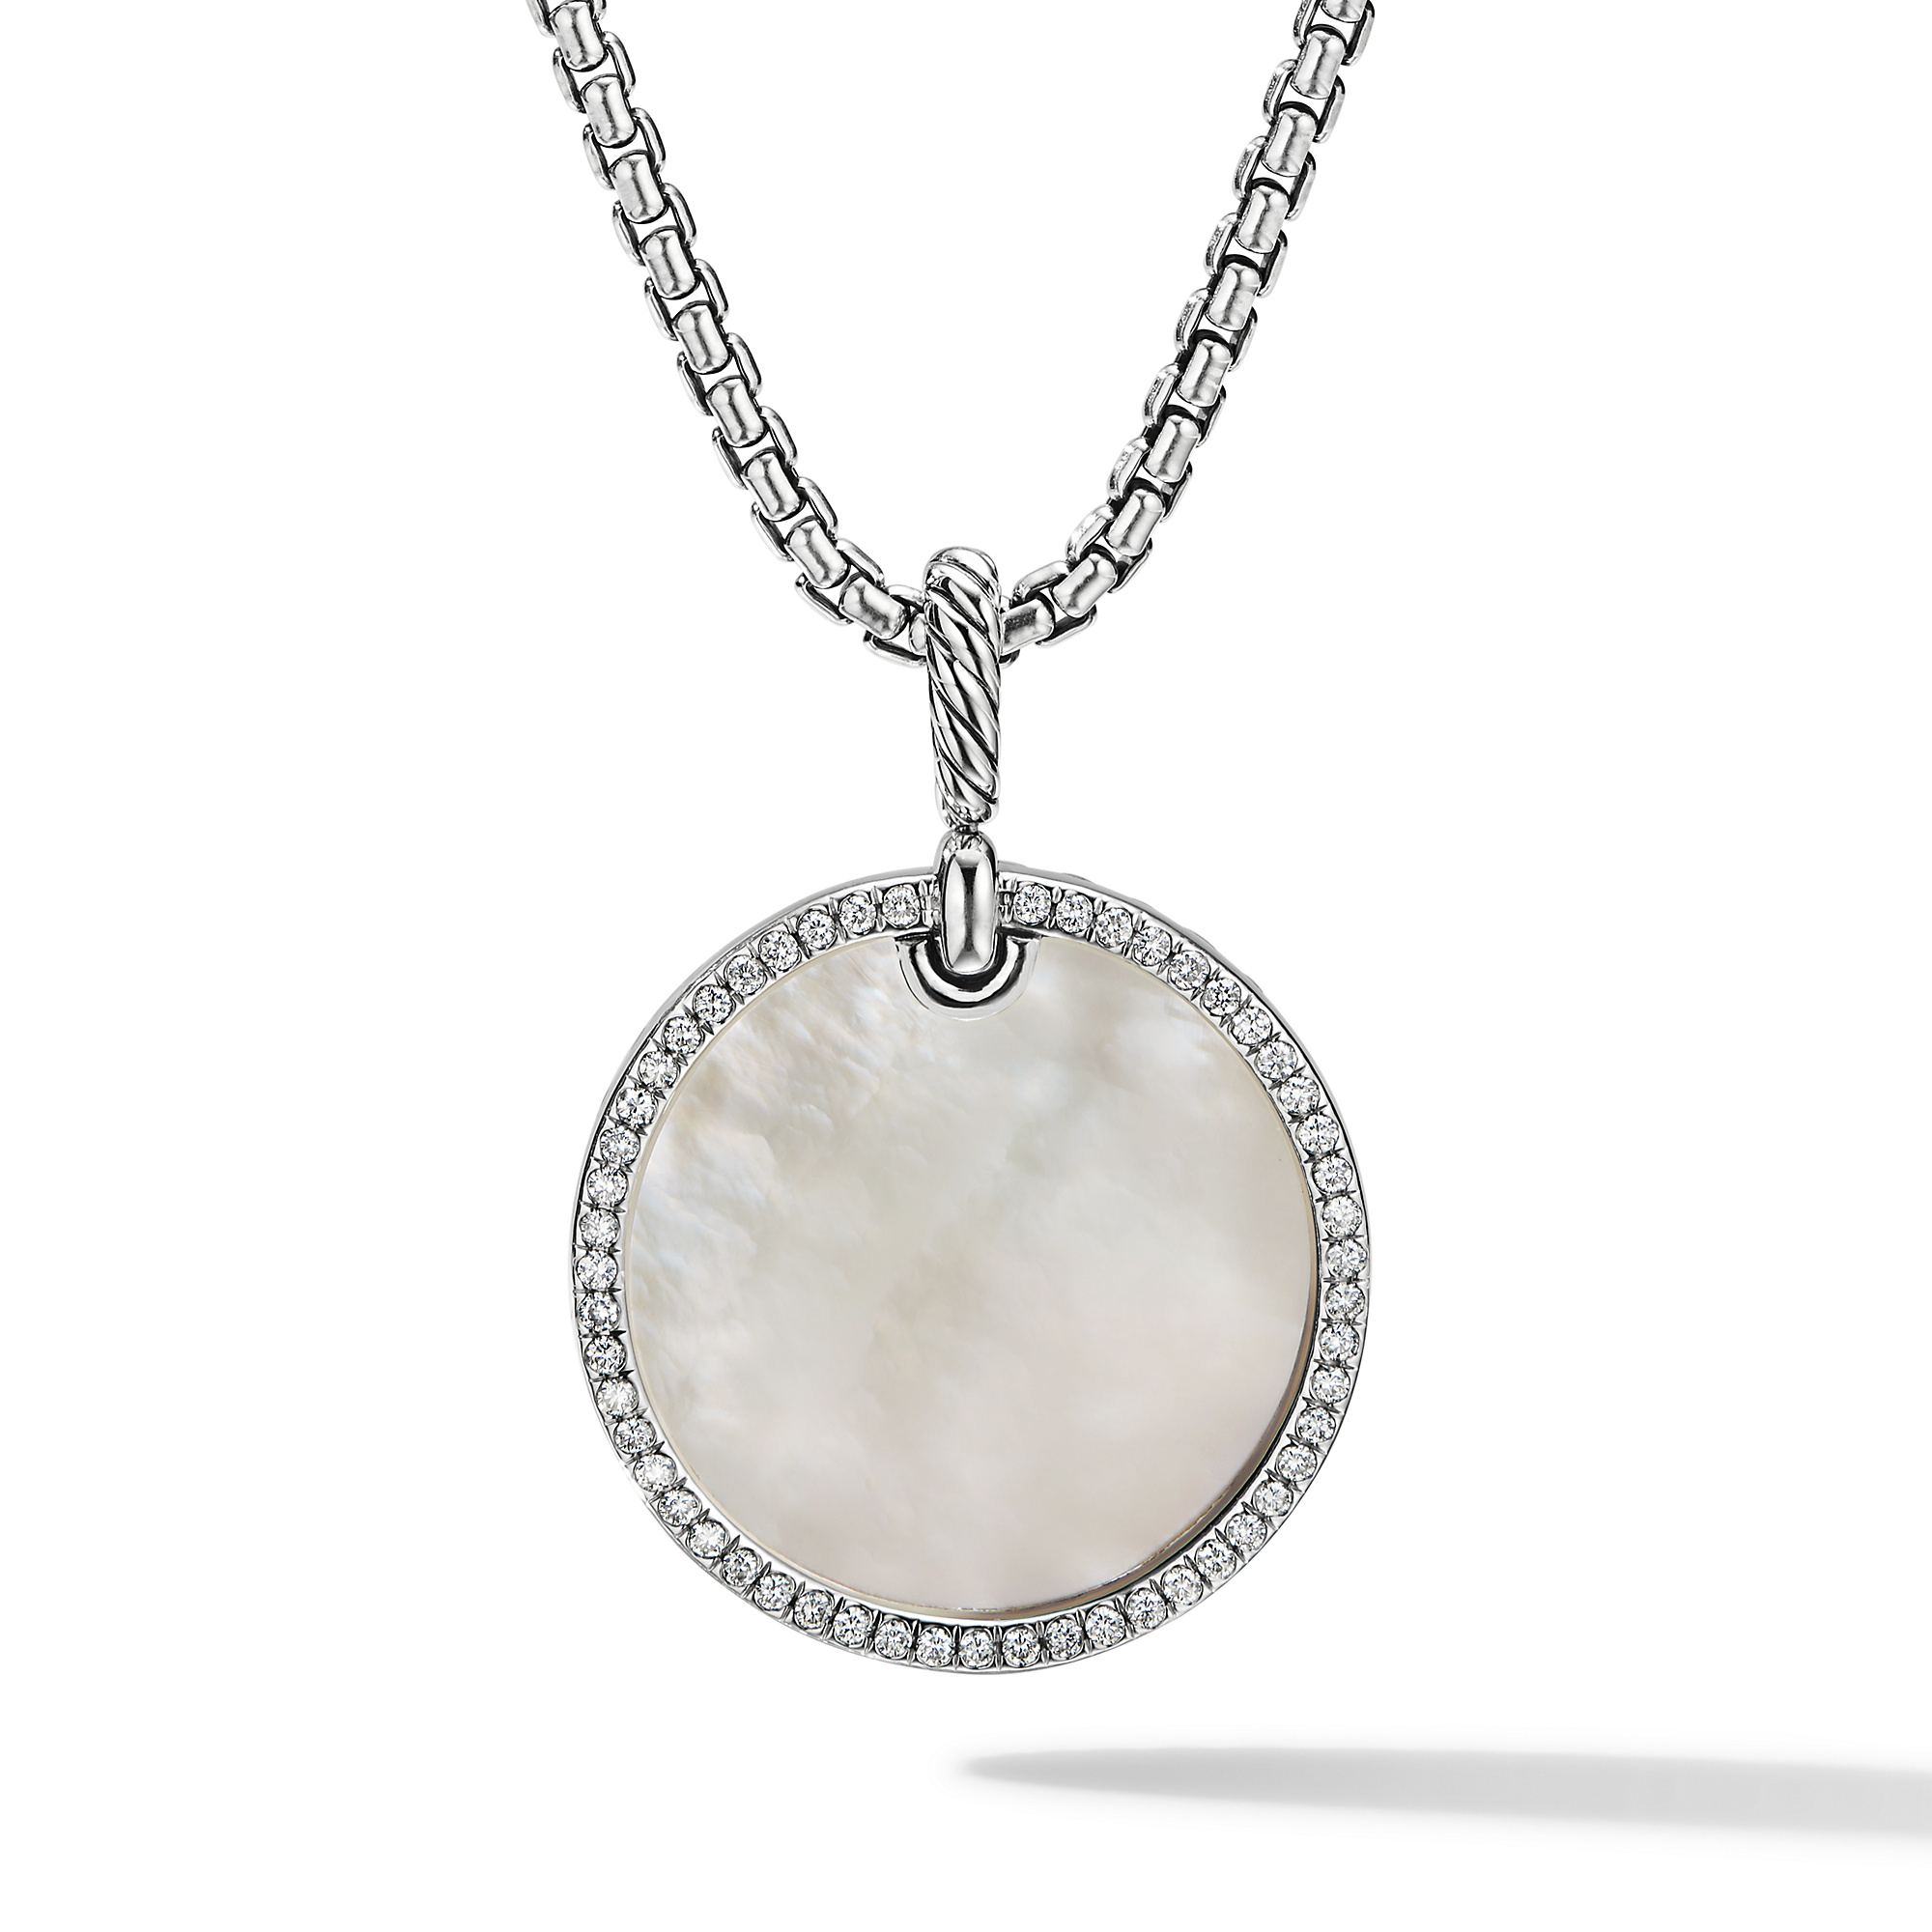 DY Elements® Disc Pendant in Sterling Silver with Mother of Pearl and Pave Diamond Rim